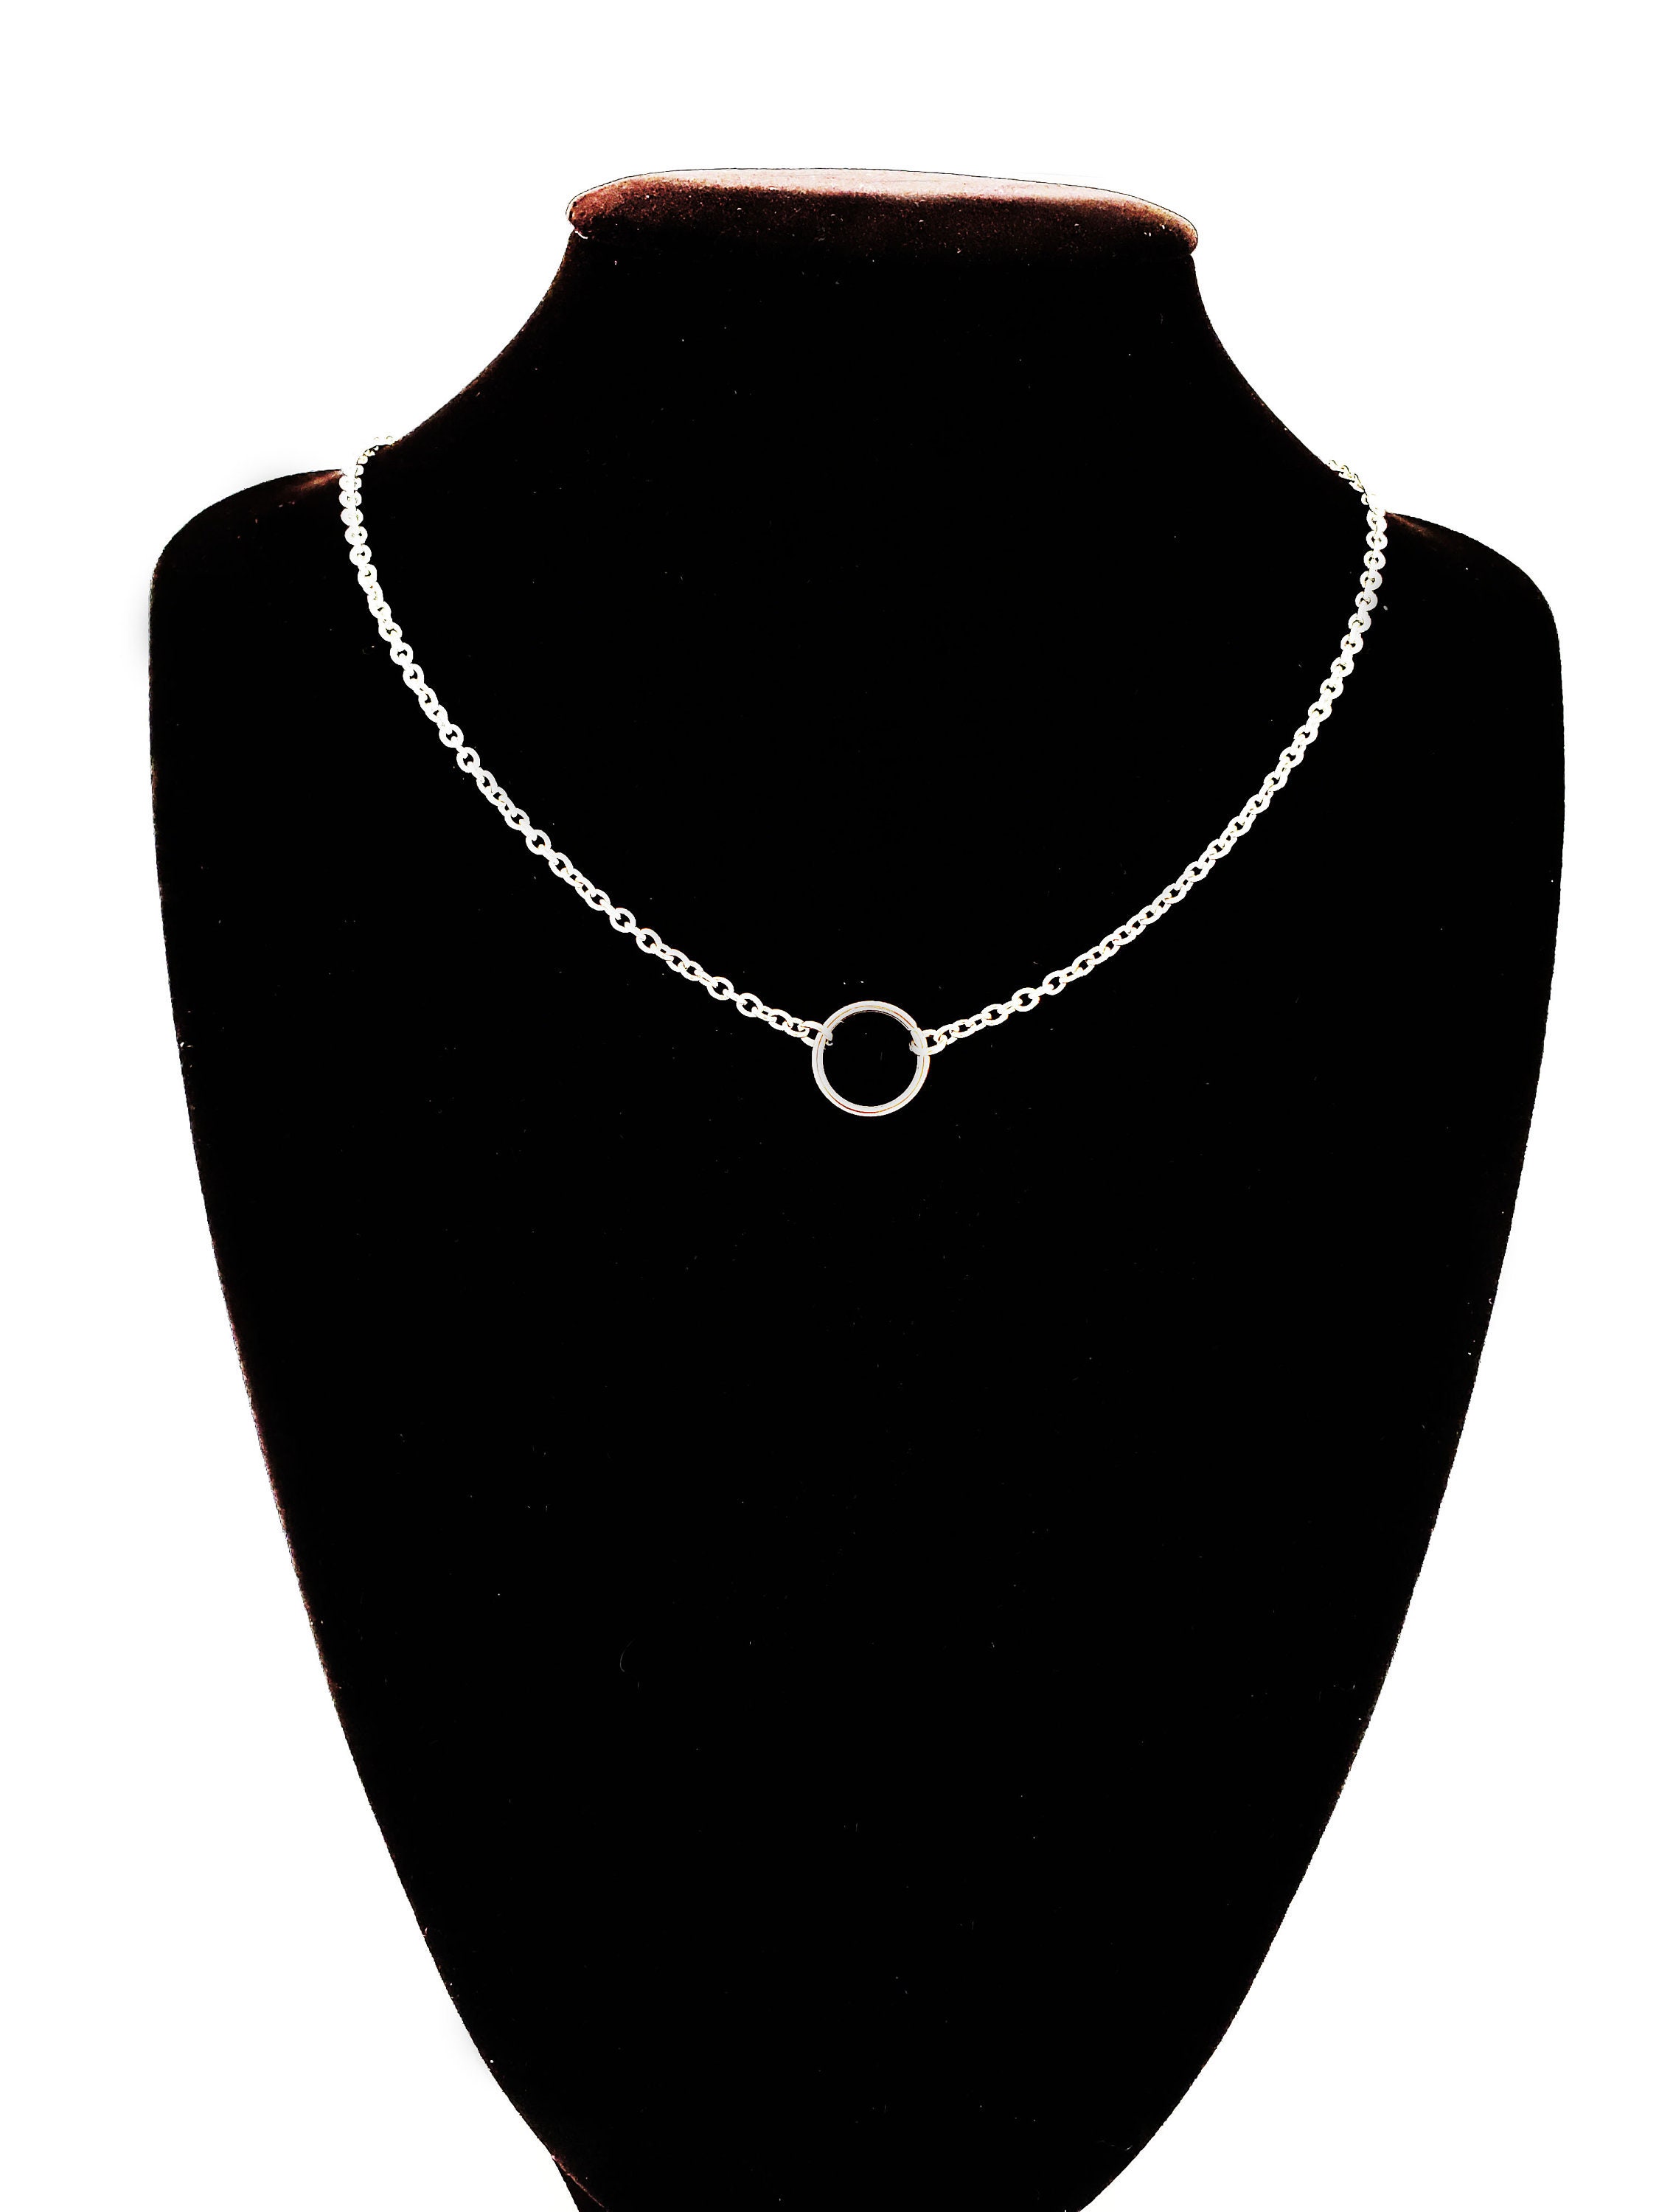 Stainless Steel Circle of O Necklace, Discreet Day Collar, 24/7 BDSM Submissive Collar, Choker photo